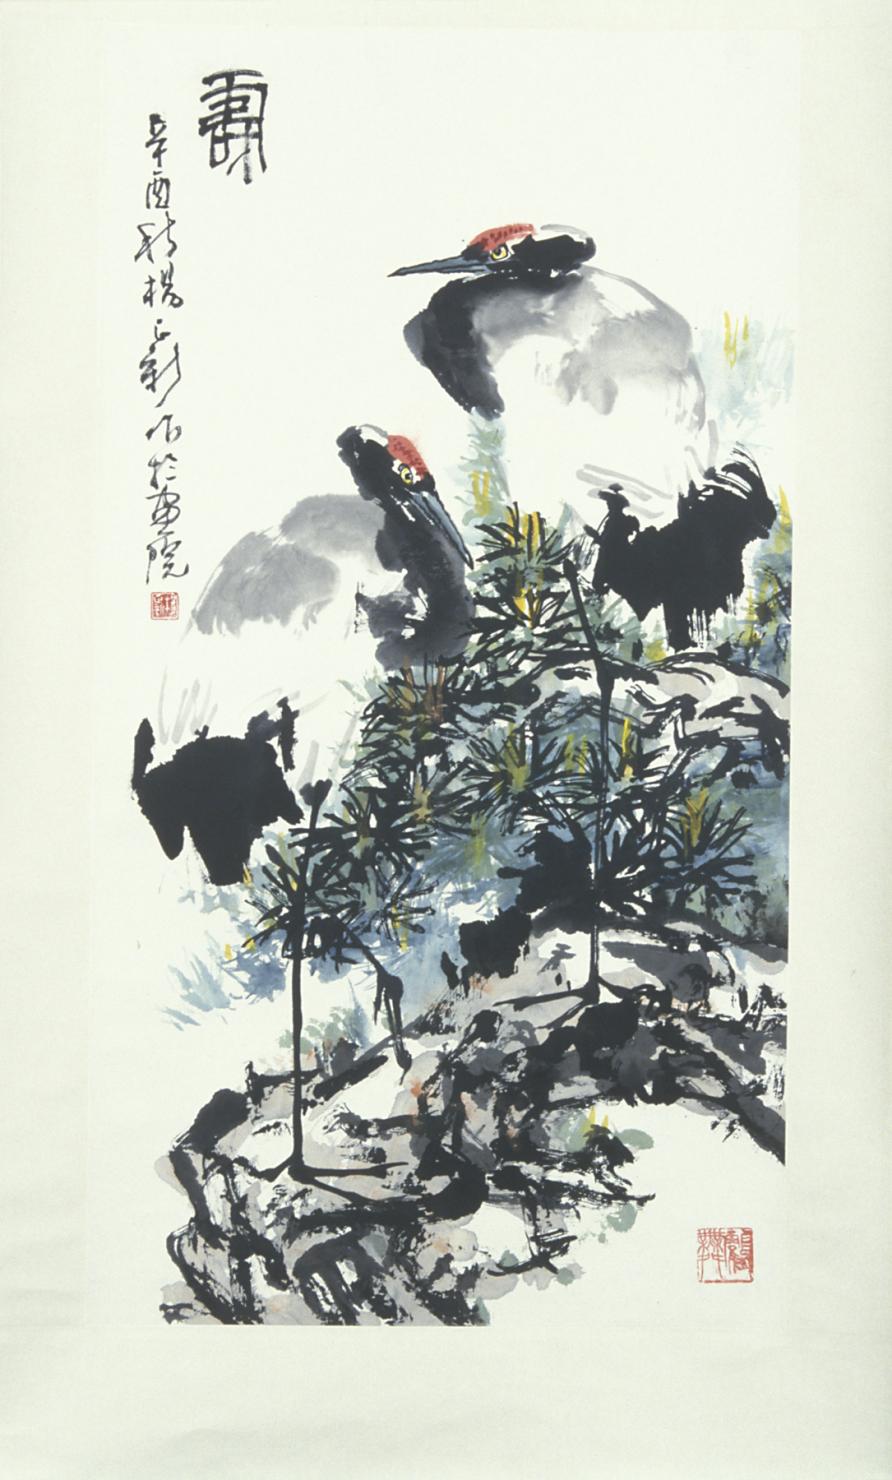 two large white cranes with black necks and a red spot on their heads stand facing each other among some scrubby trees